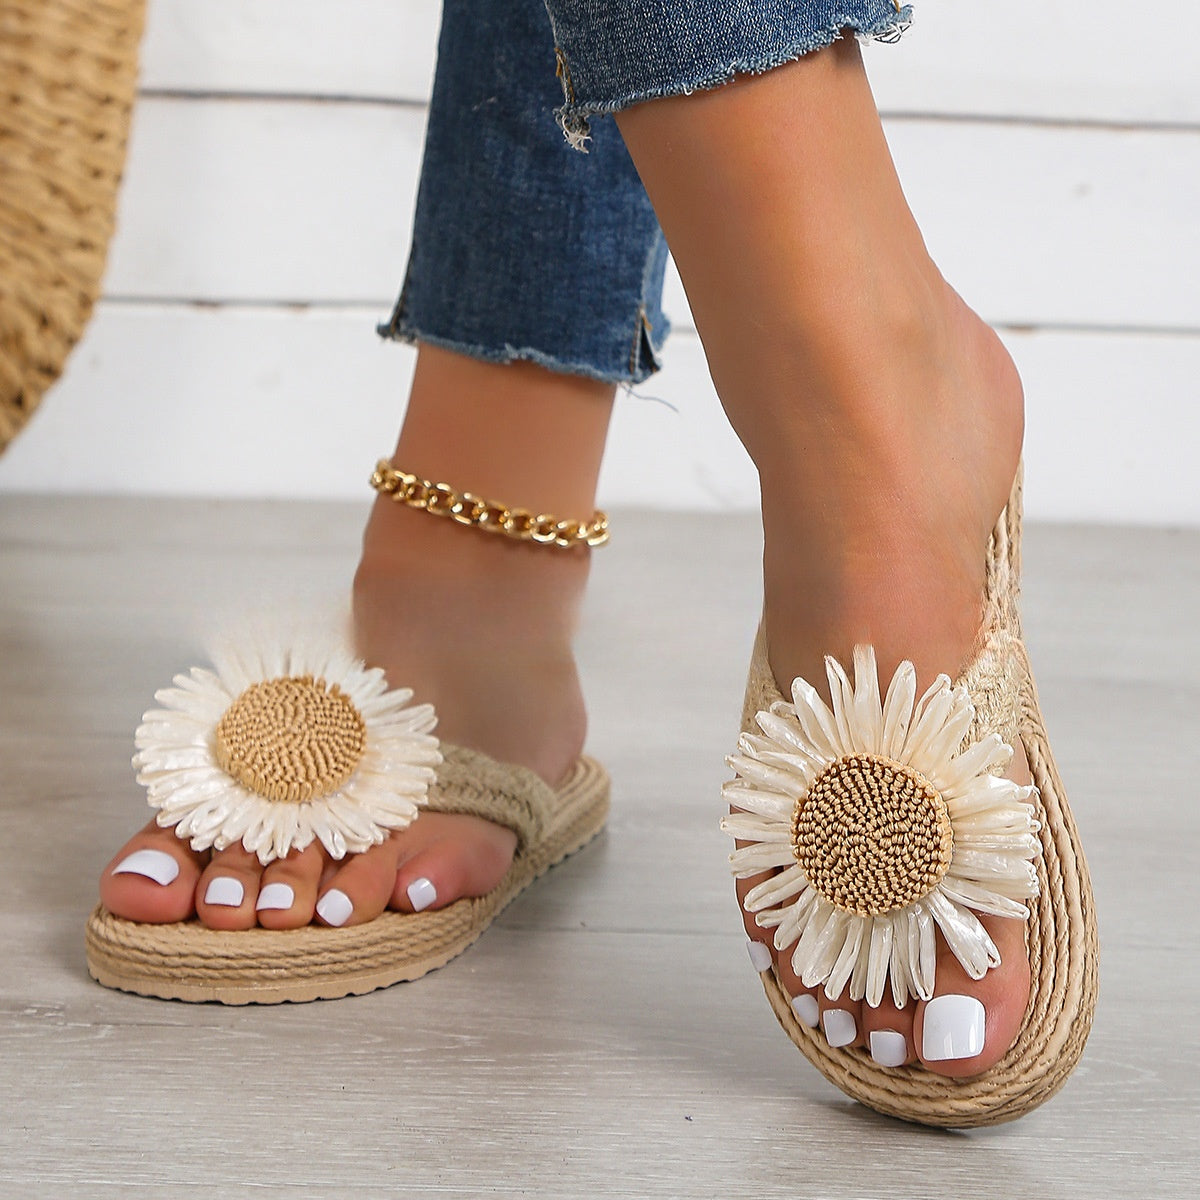 Slippers  | Summer New Fashion Women's Linen Fashion Simple Flower Flat Casual Sandals | |  | thecurvestory.myshopify.com